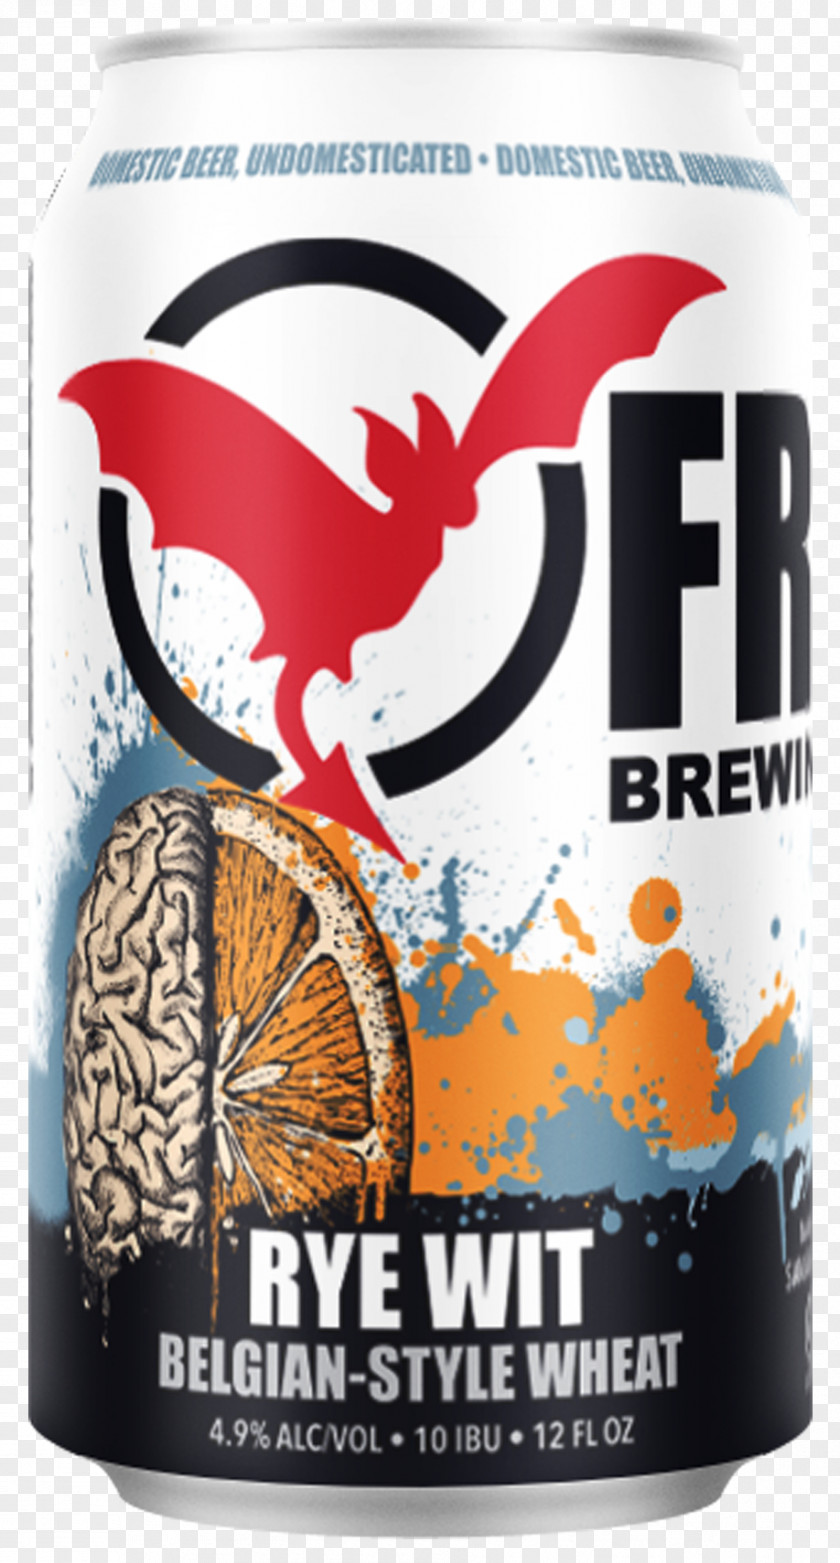 Beer Brewing Grains & Malts BAKFISH Company Freetail Co. Brewery PNG